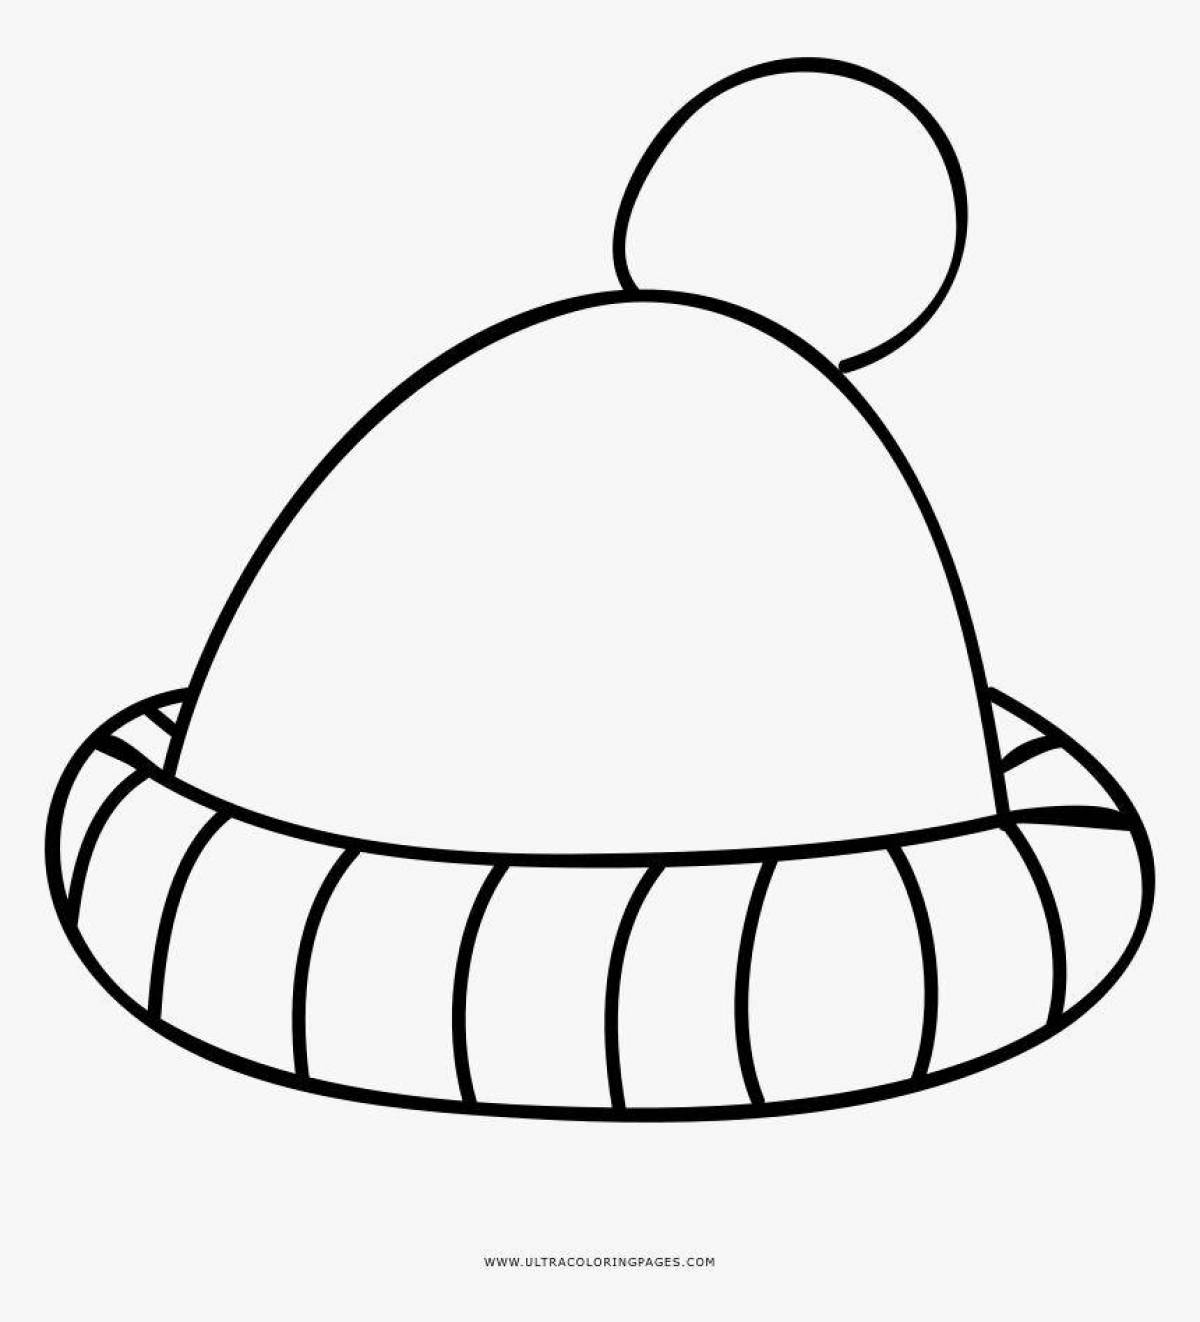 Amazing hat coloring book for 2-3 year olds